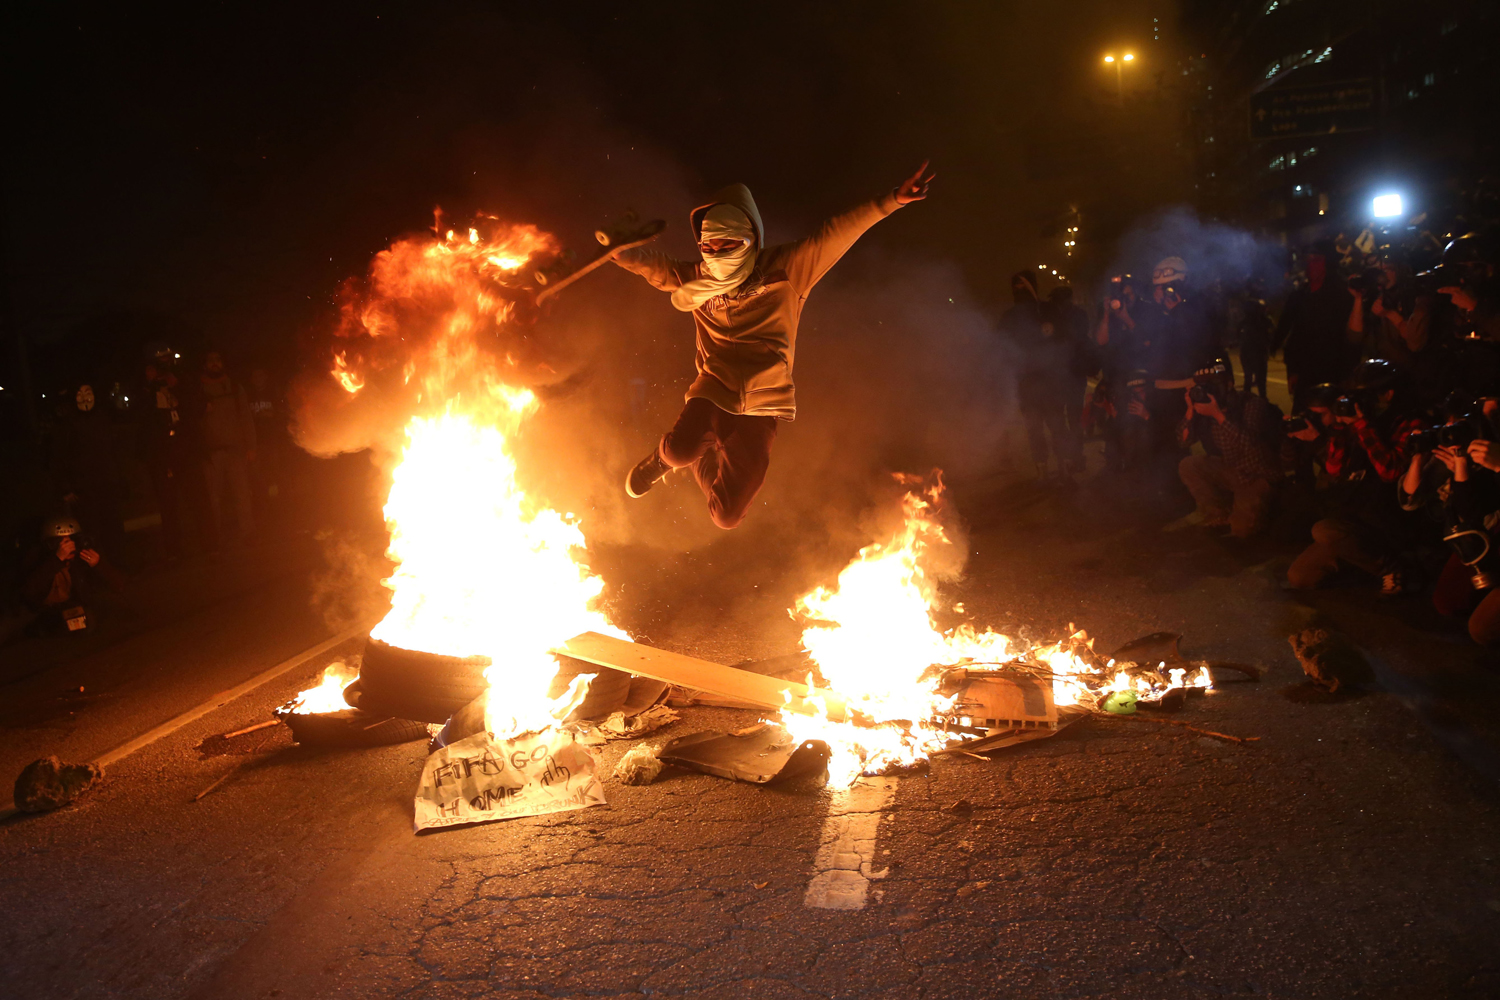 A protester jumps over a fire barricade during a protest against 2014 FIFA World Cup in Sao Paulo, on June 19, 2014.